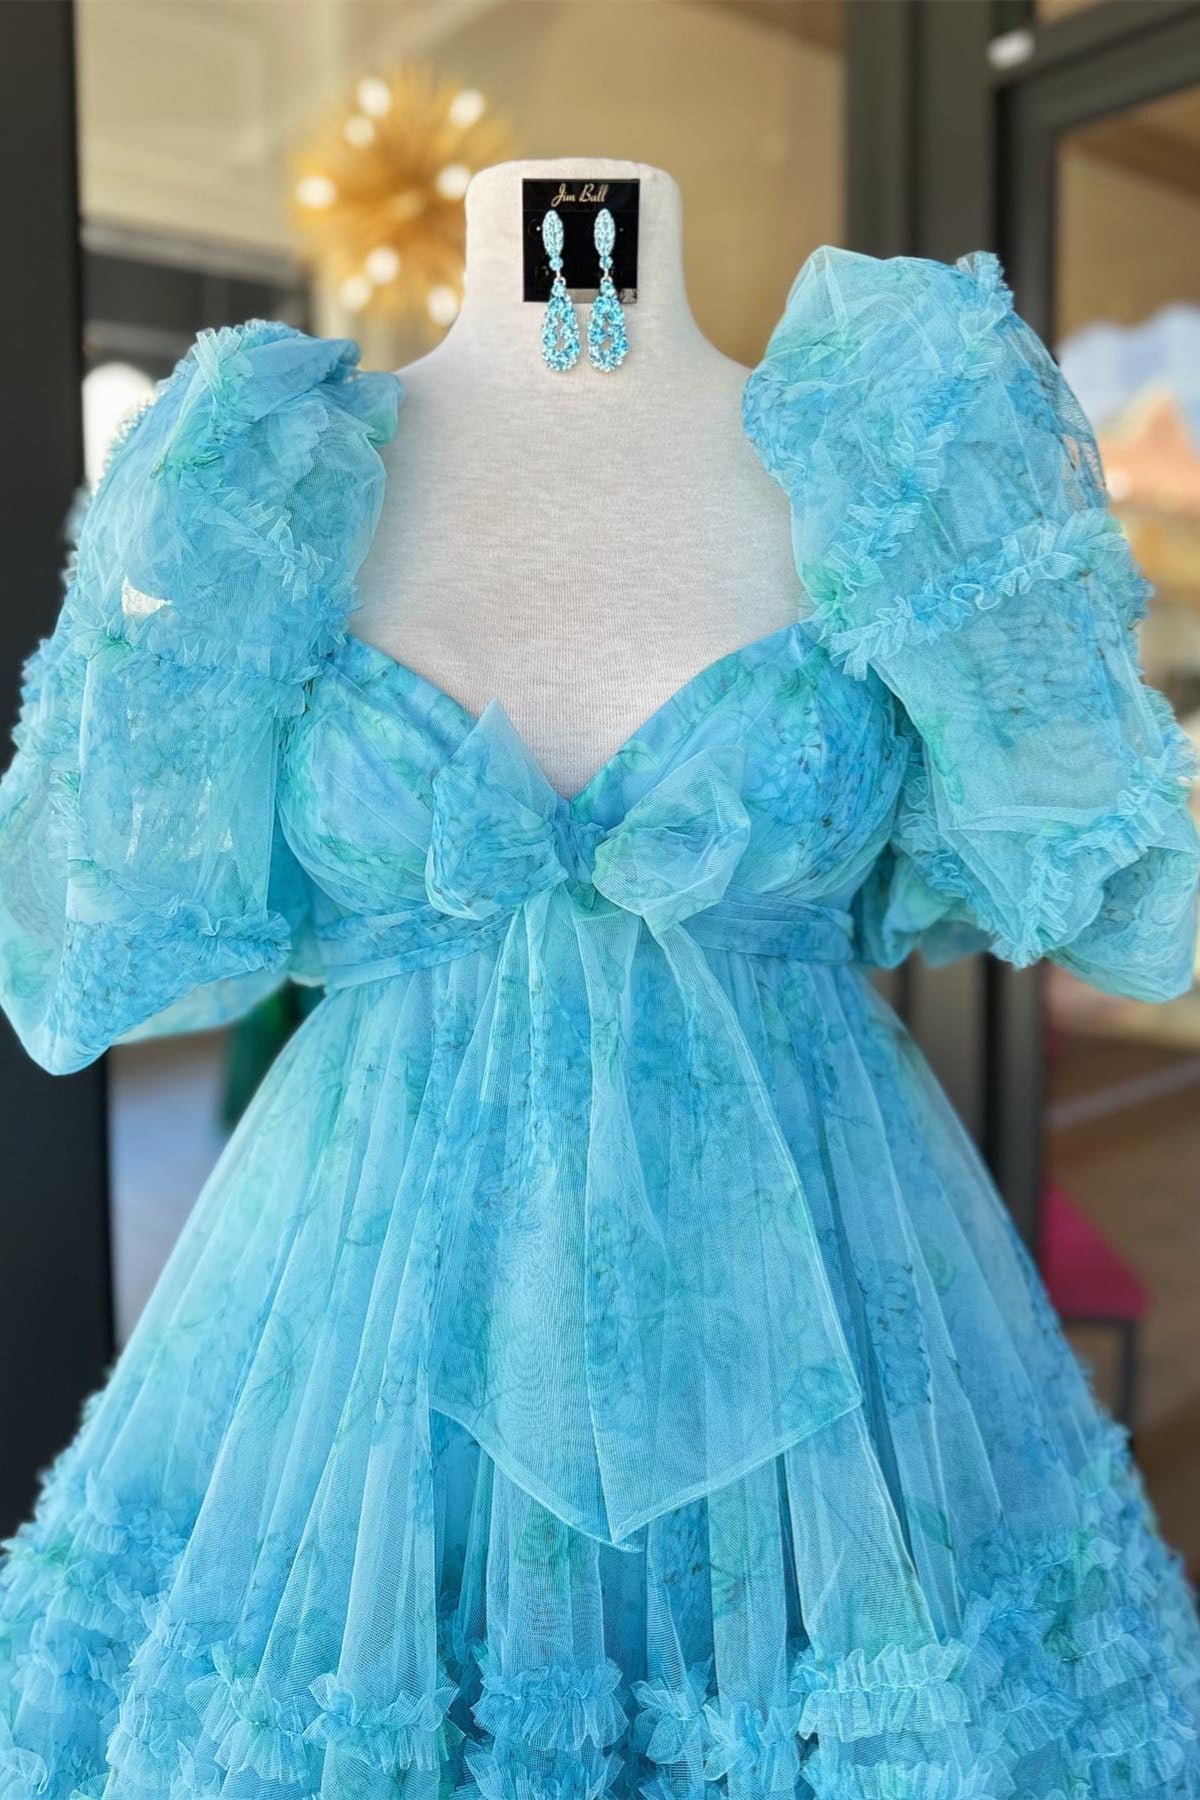 Party Dress Meaning, Blue Puff Sleeves Ruffles Babydoll Homecoming Dress with Bow